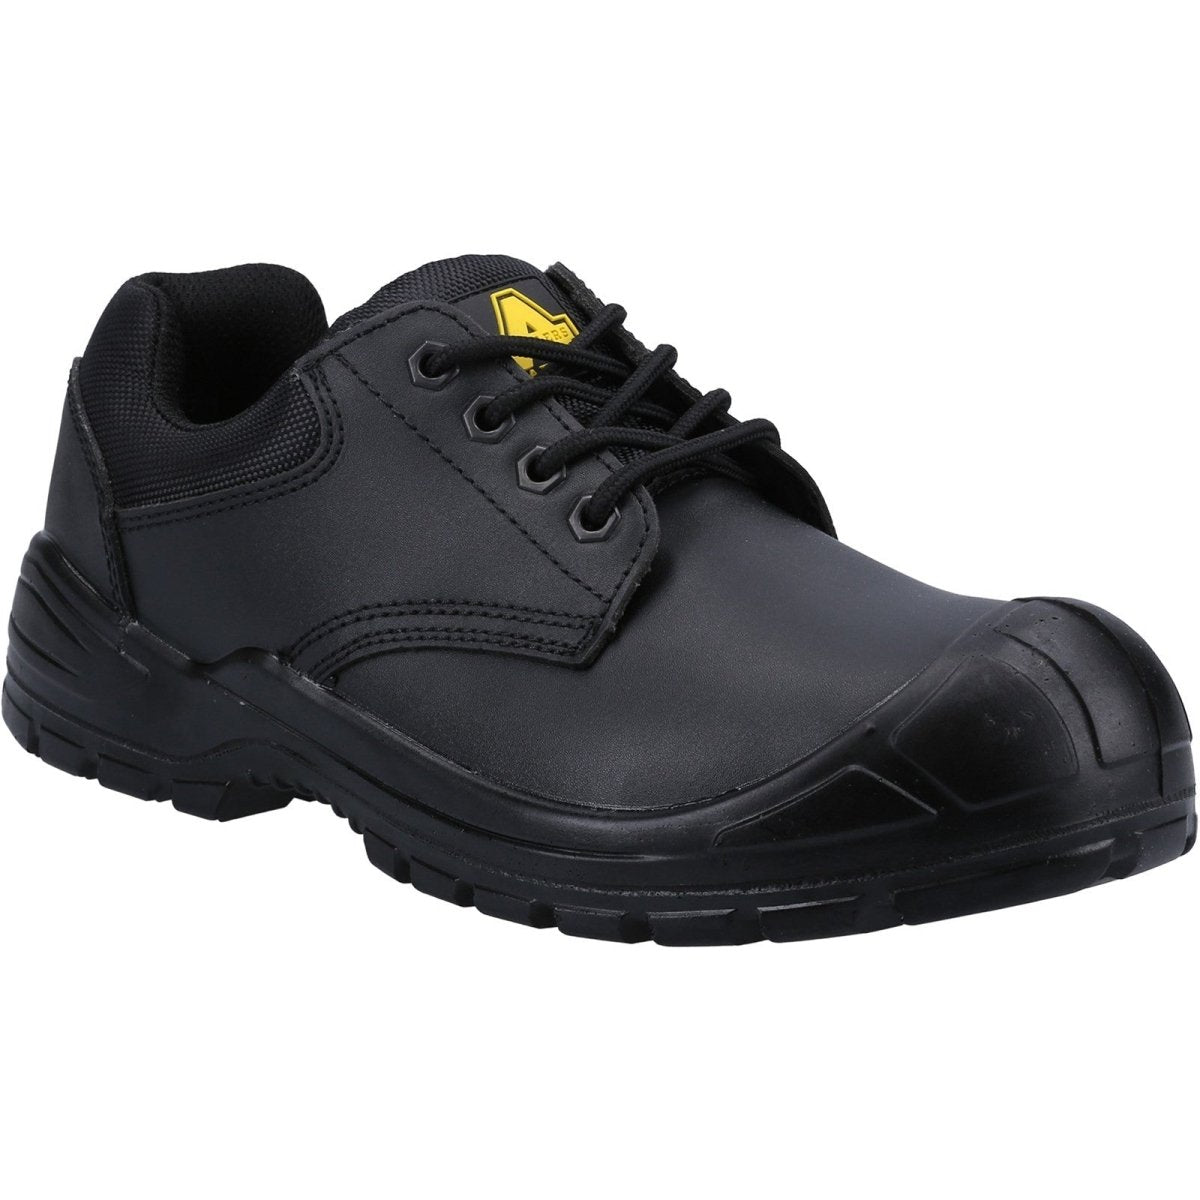 Amblers AS66 Black Steel Toe Cap Safety Shoes - Shoe Store Direct